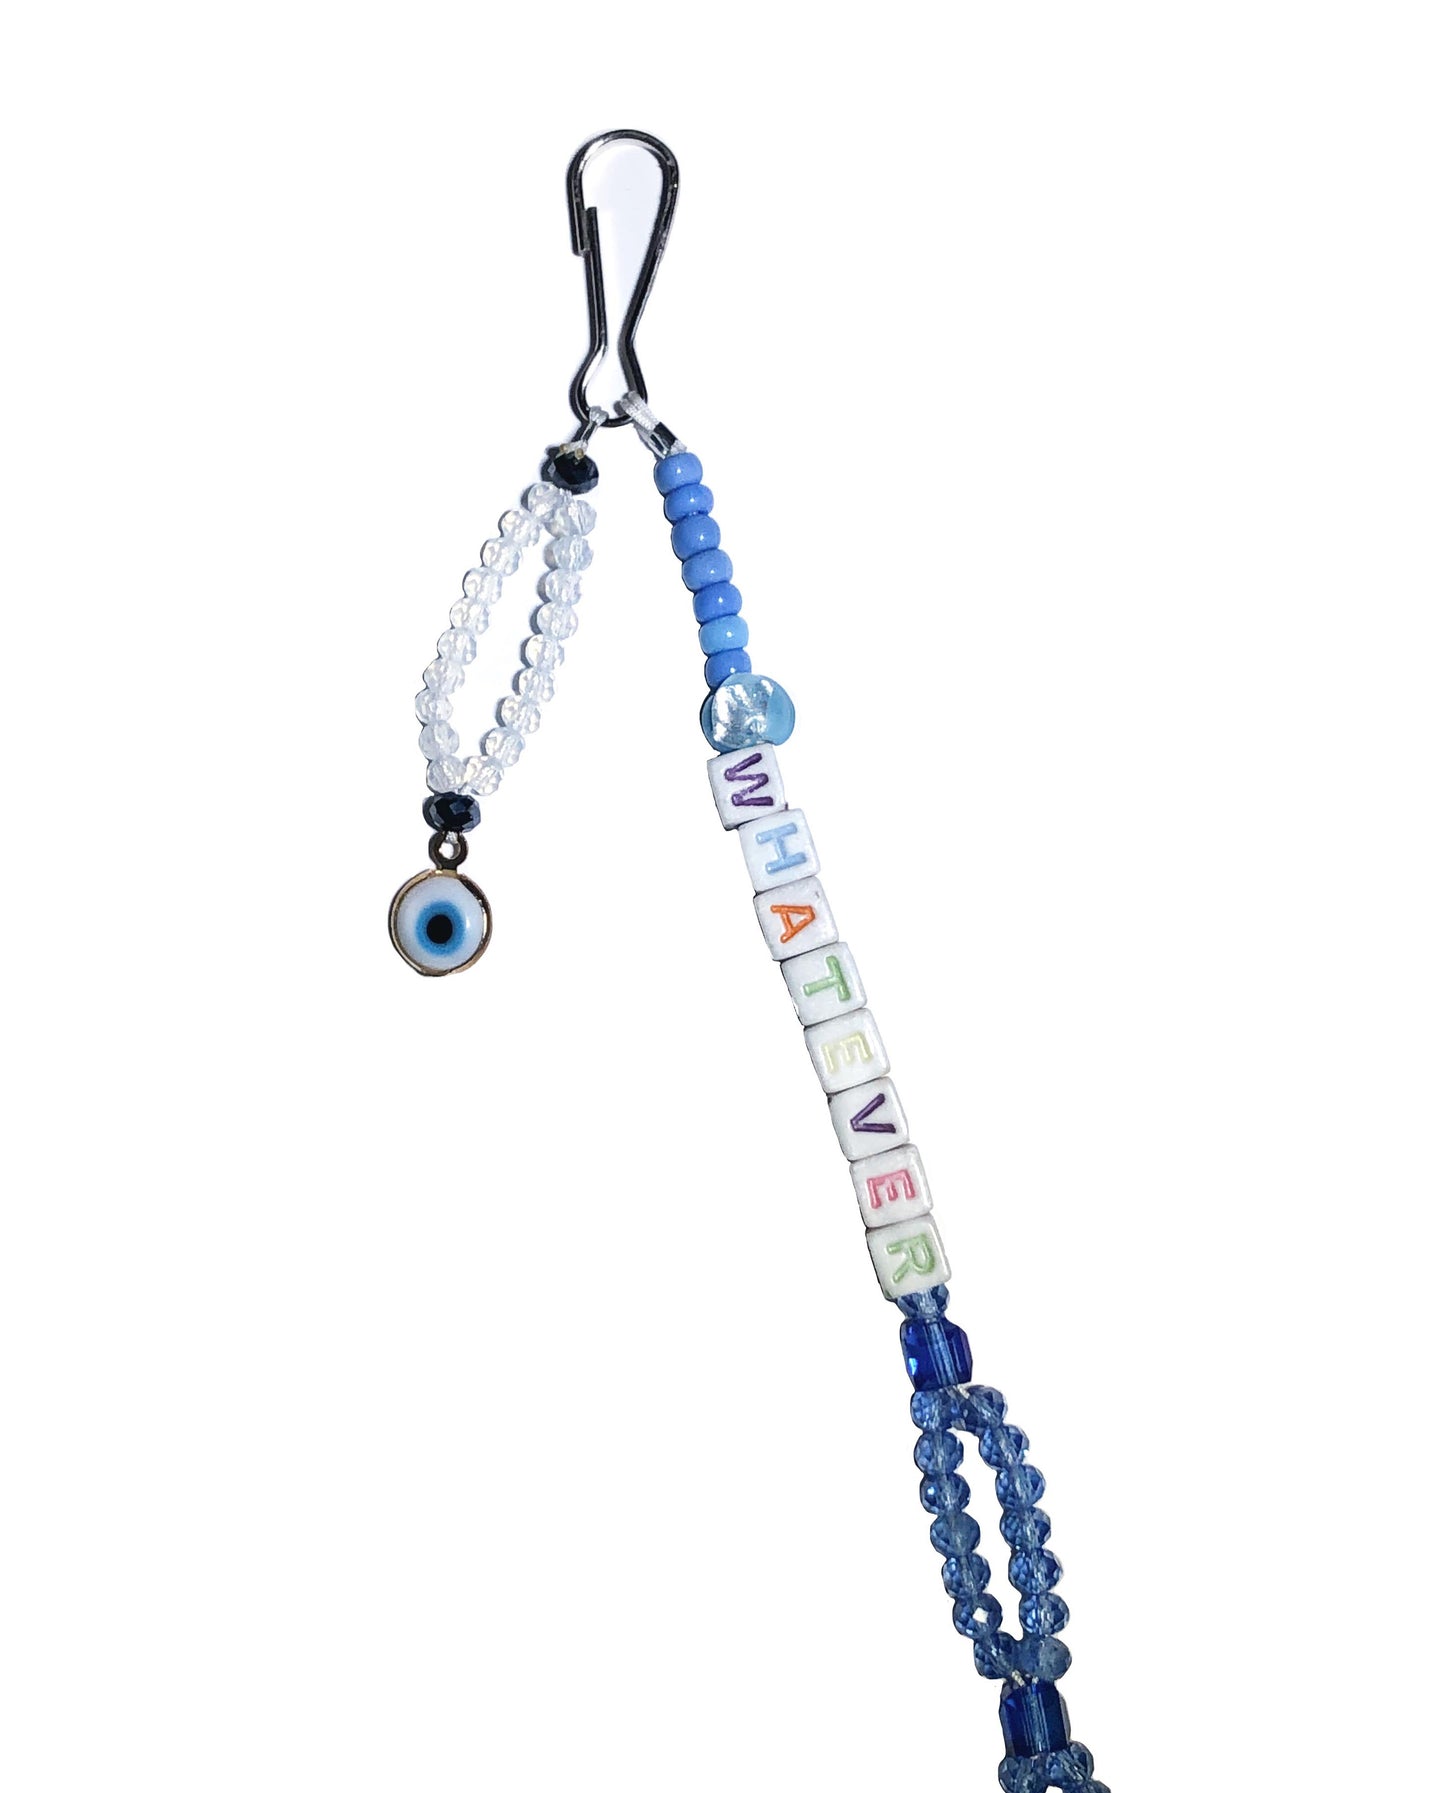 Blue and white crystal beaded bag charm with whatever spelled out using letter beads and an evil eye charm.